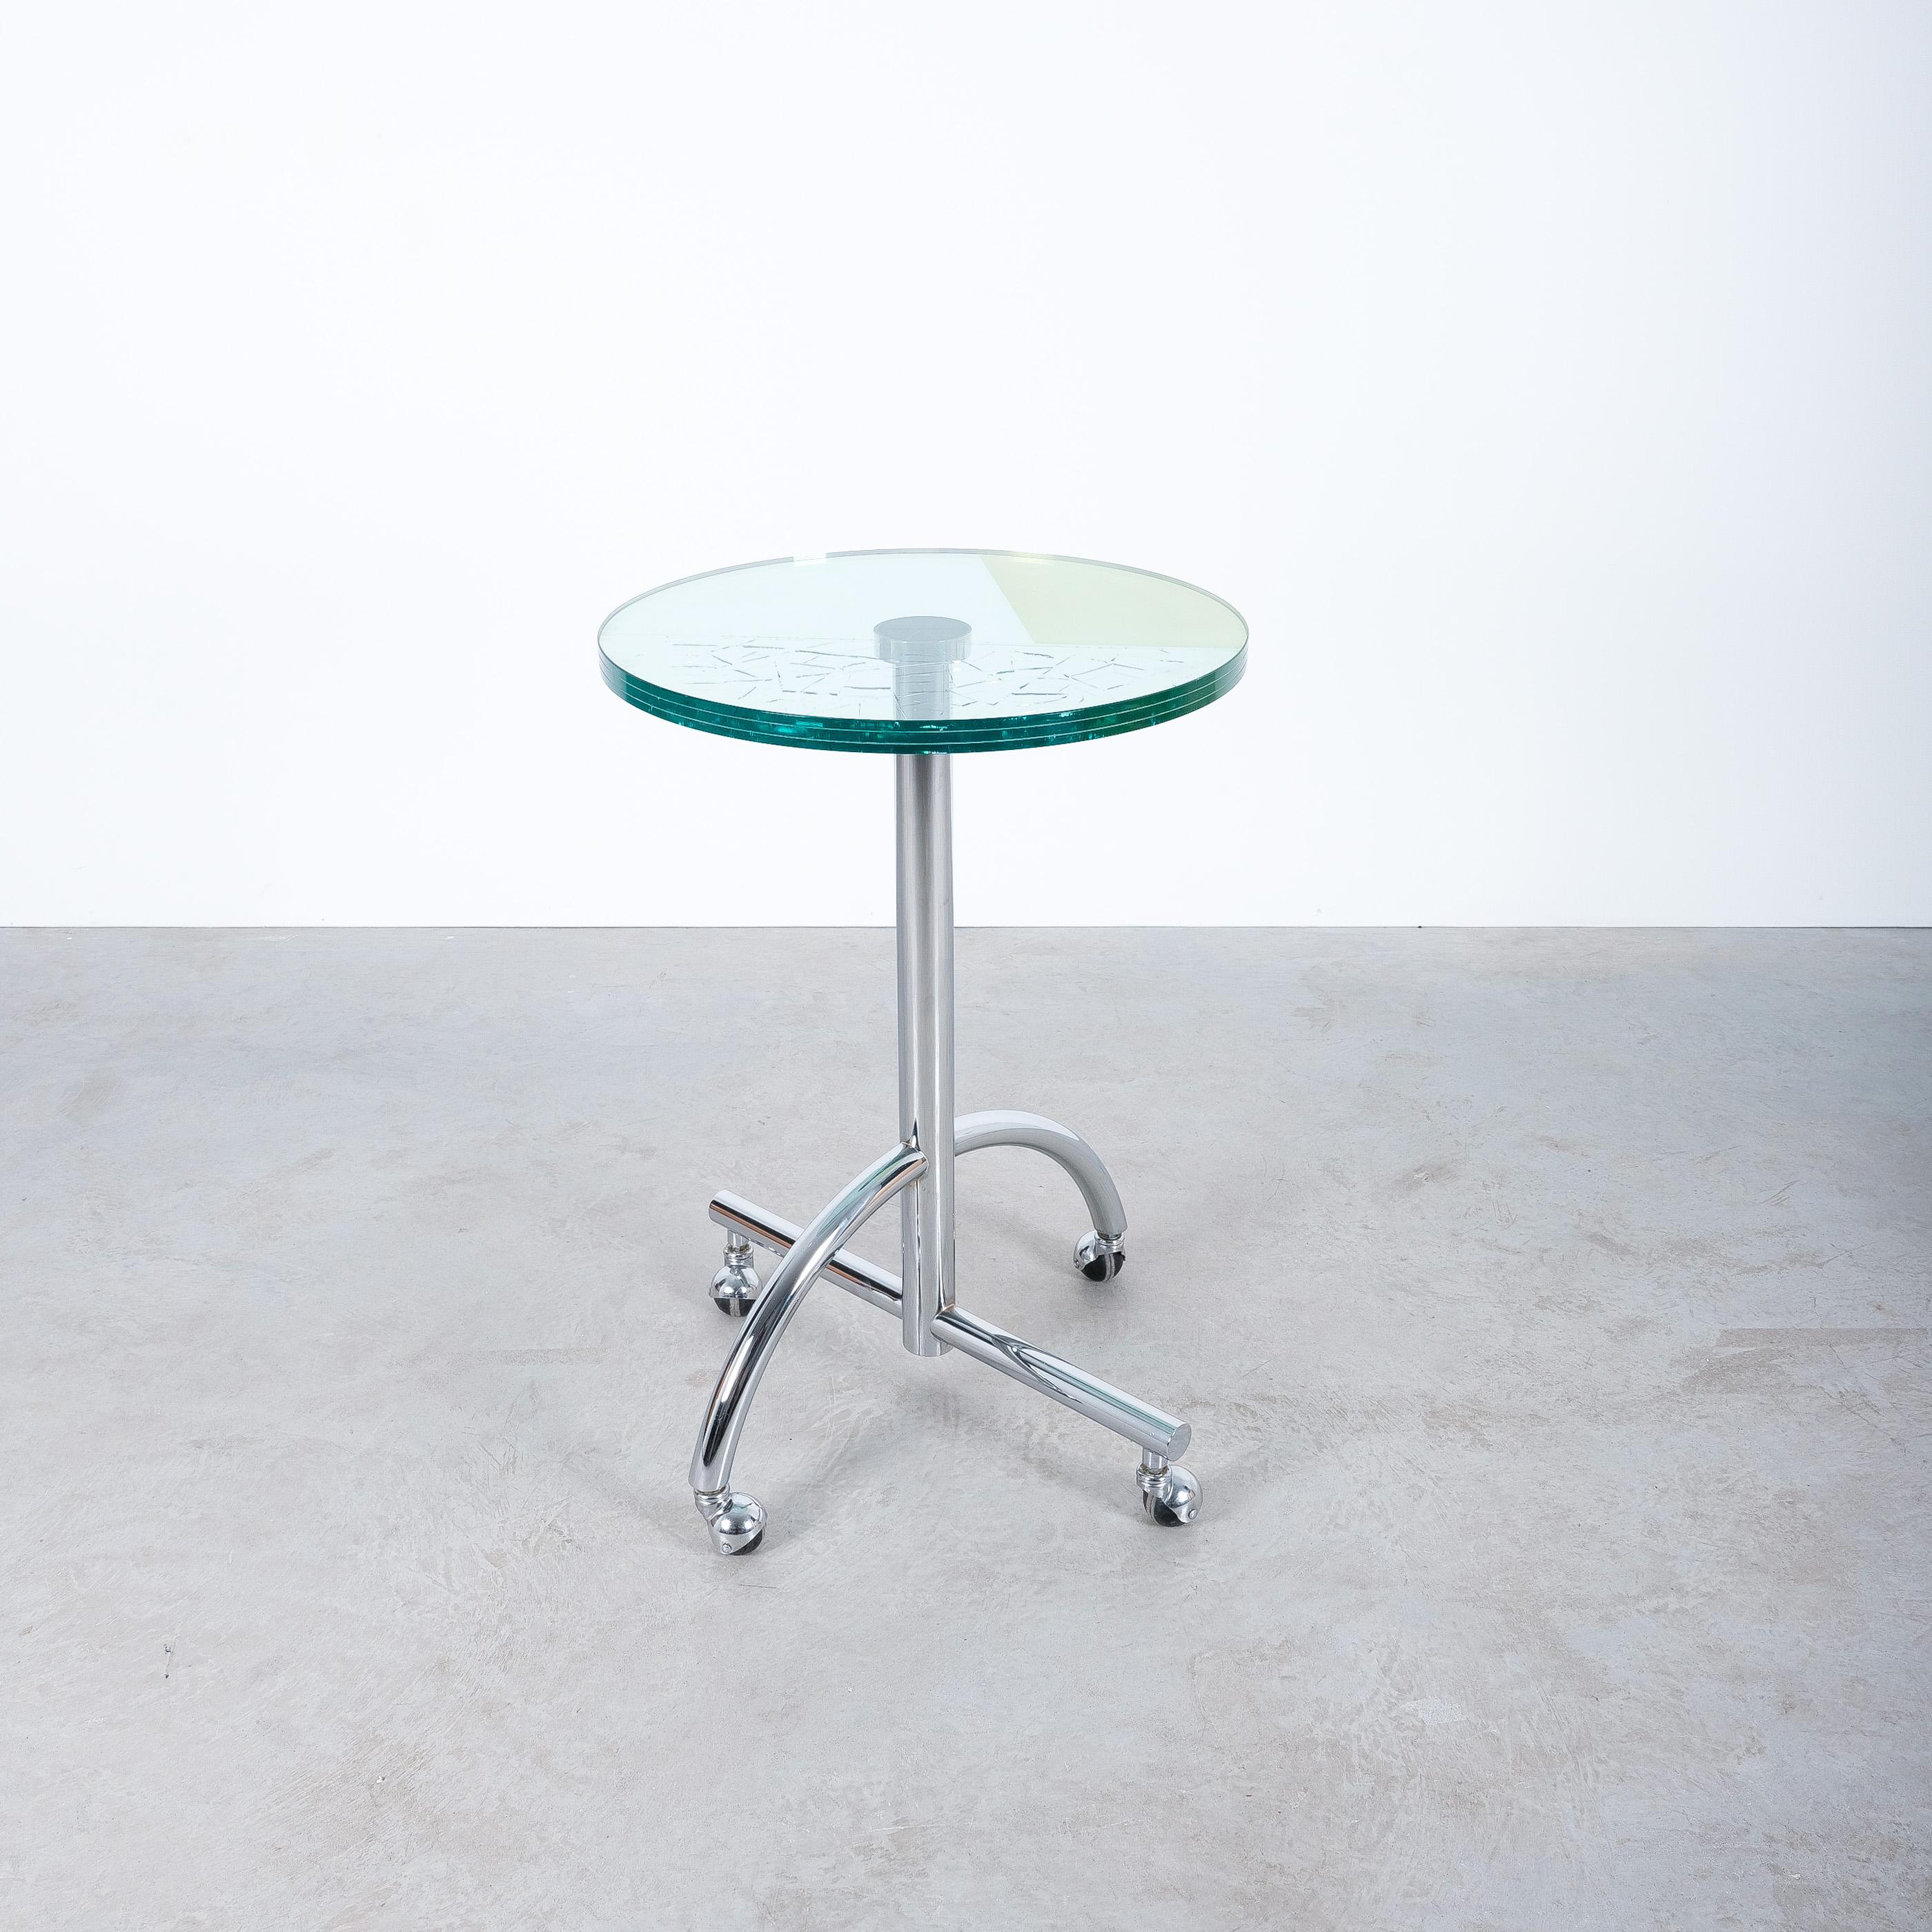 Round rolling table sally by Shiro Kuramata for Memphis, 1987

Dimensions are 30.31